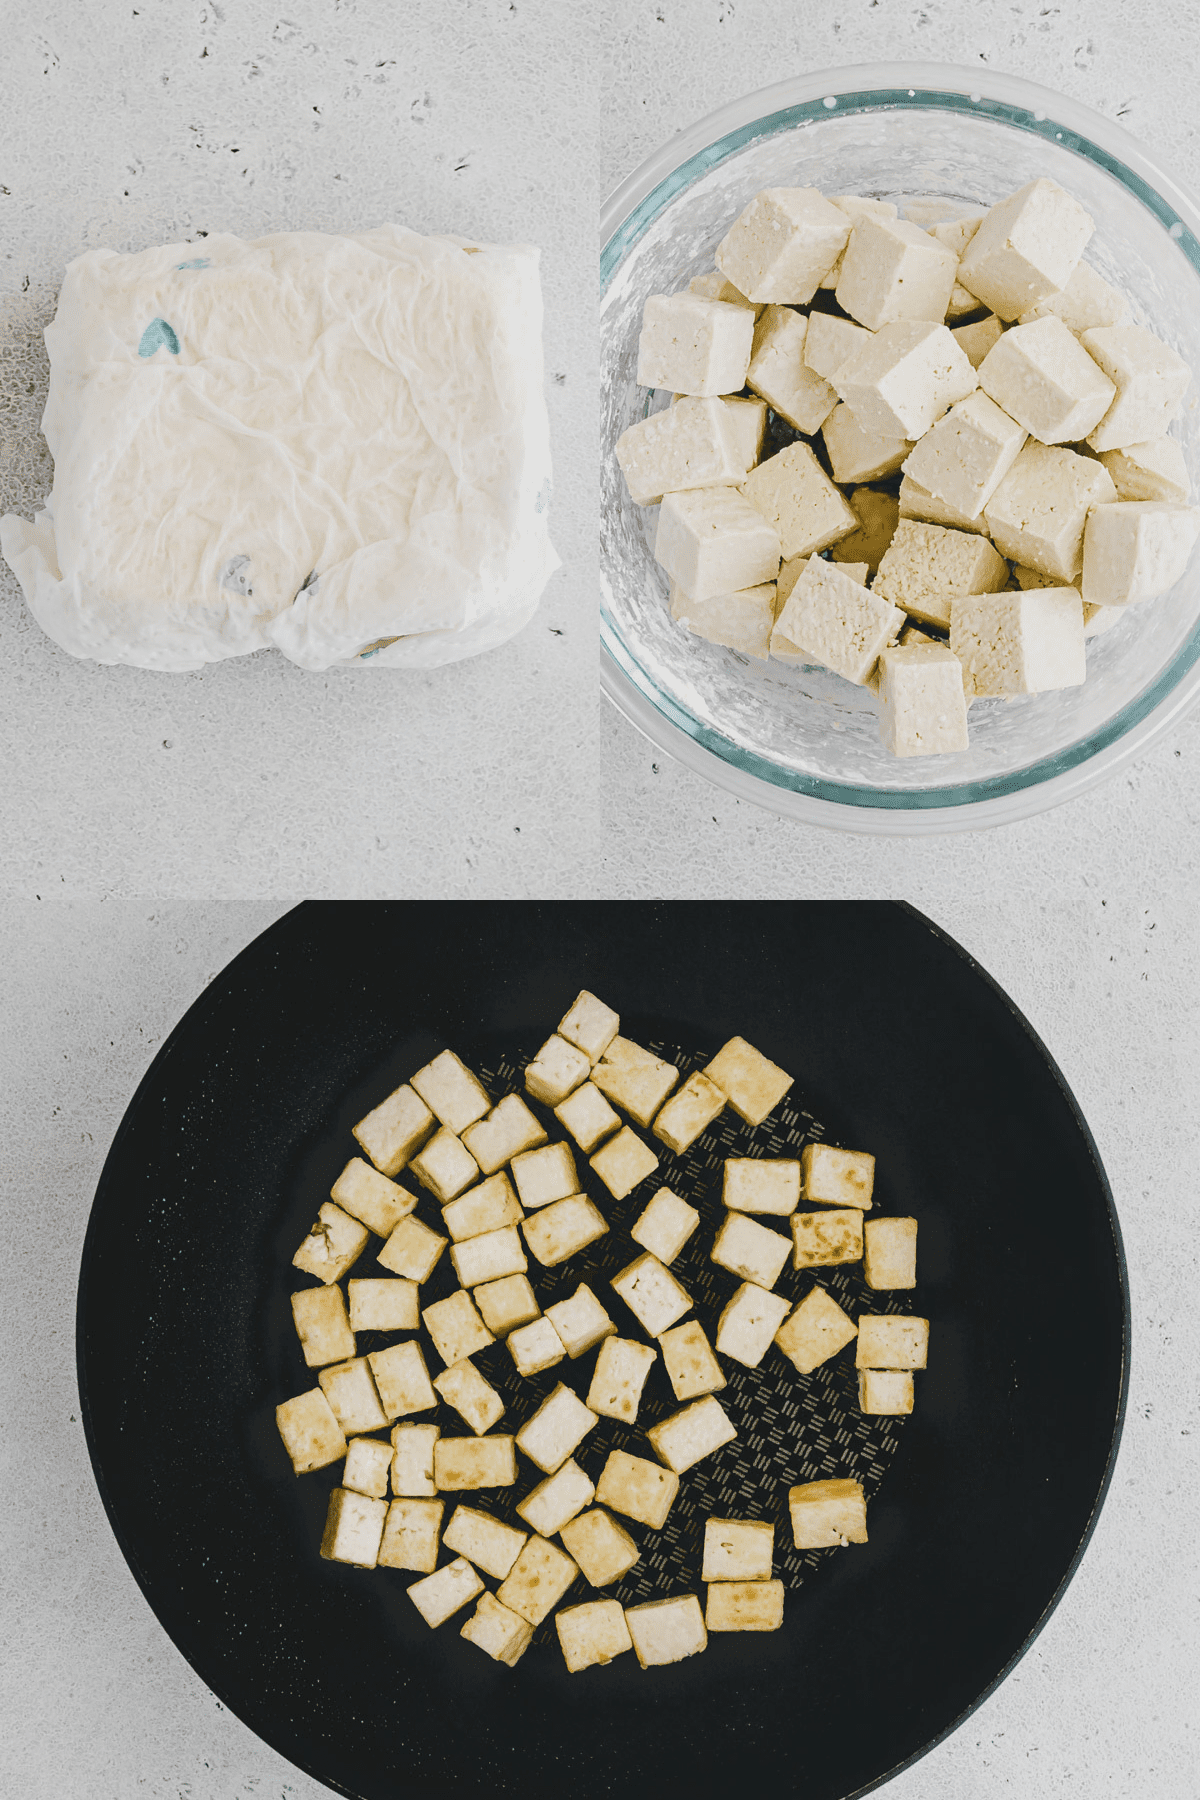 Gallery of 3 images: Top left is top view of a block of tofu wrapped in kitchen towel that is wet, top right is a top down view of a glass bowl with cubes of tofu in it, bottom picture is cubed tofu in a frying pan getting slightly browned. 